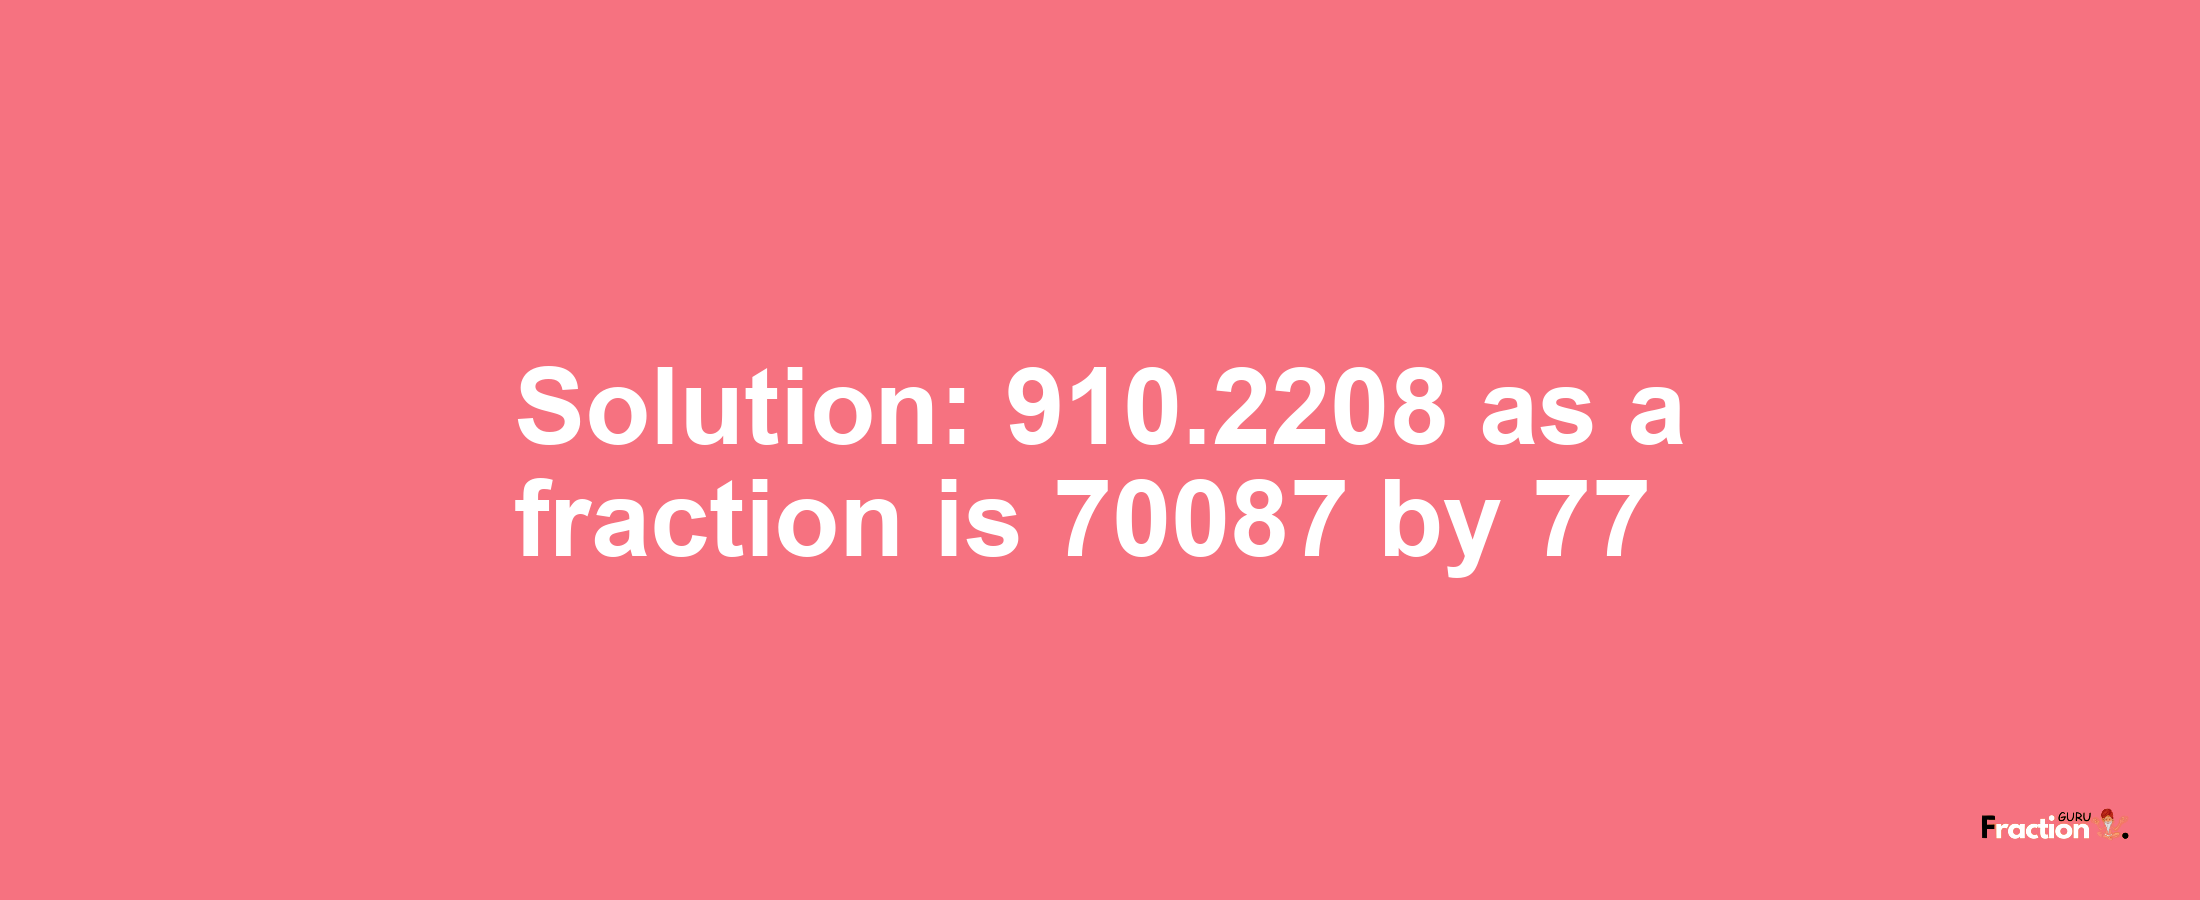 Solution:910.2208 as a fraction is 70087/77